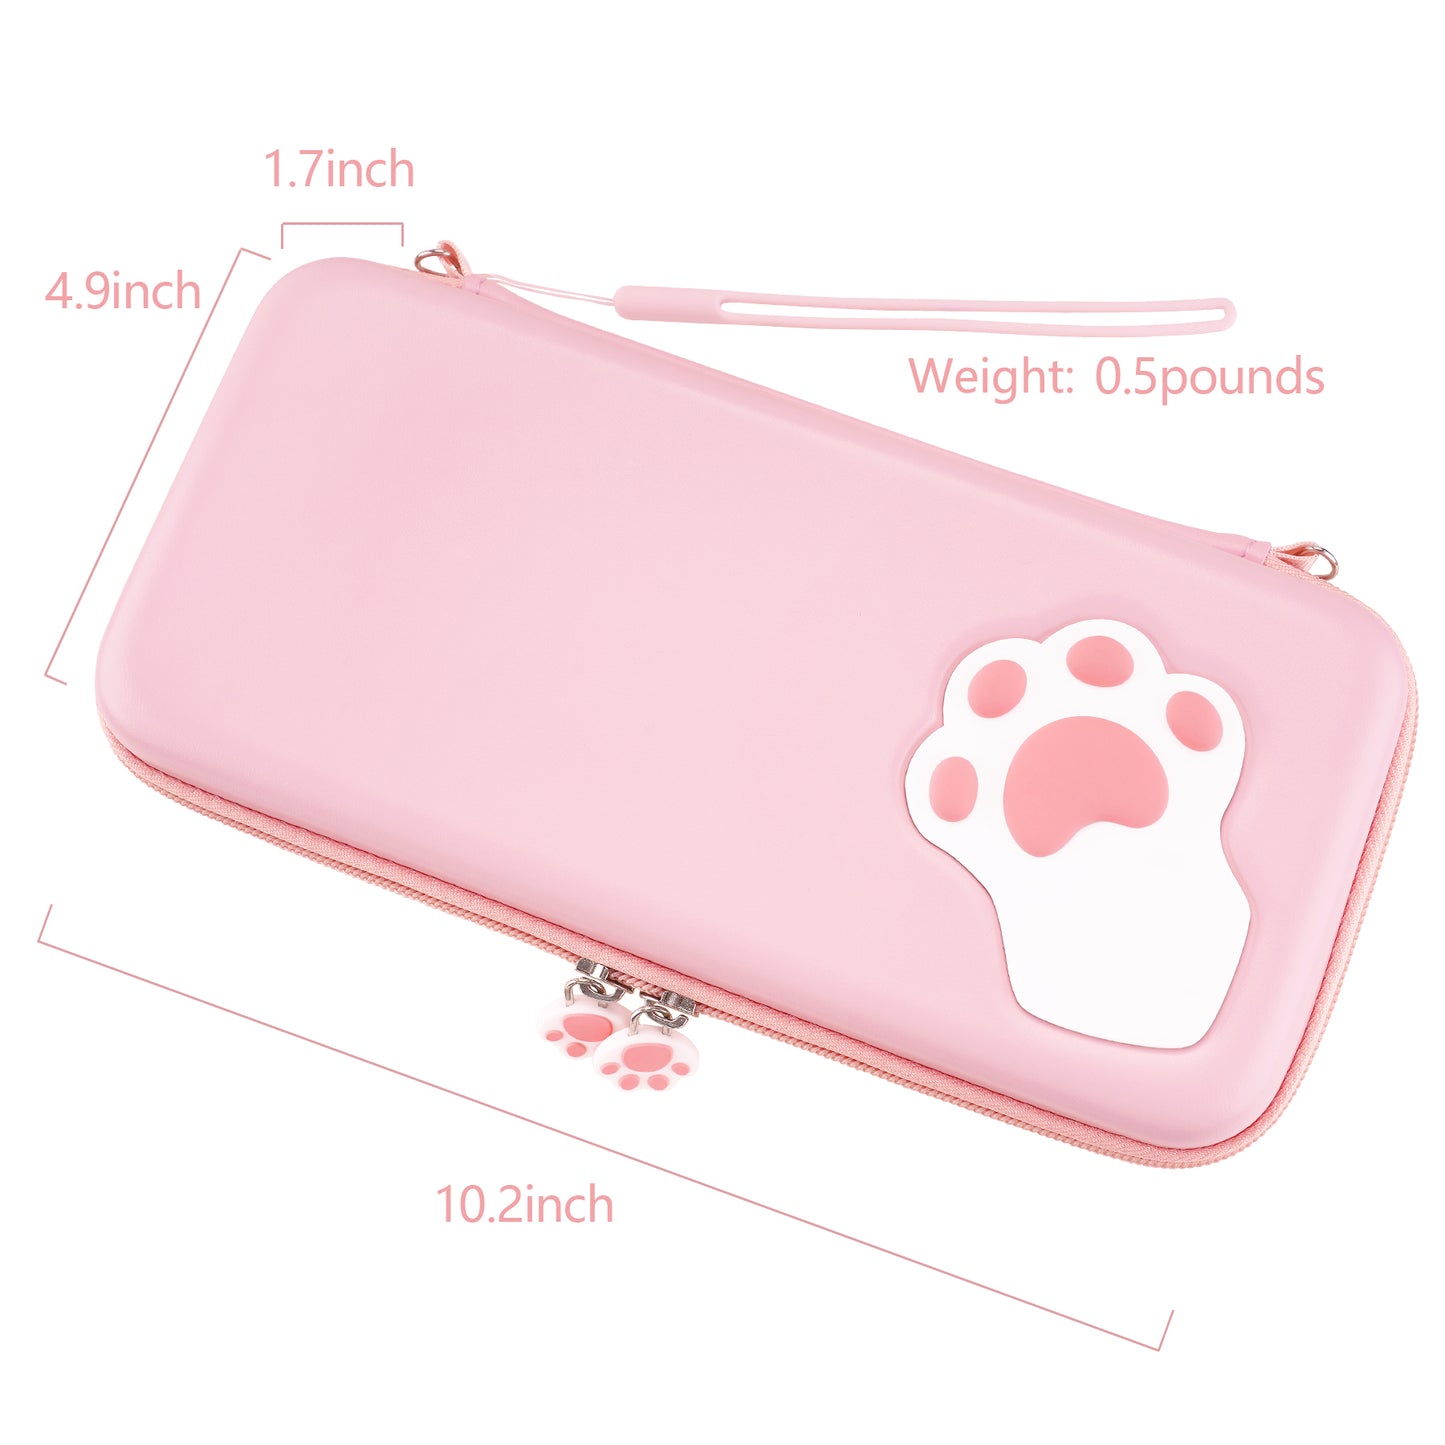 PlayVital Pink Cute Switch Carrying Case, Cat Paw Switch Hard Portable Pouch, Soft Velvet Lining Switch Storage Bag, Travel Case for Nintendo Switch OLED w/Thumb Grips Game Cards Slots & Inner Pocket - NTW001 PlayVital